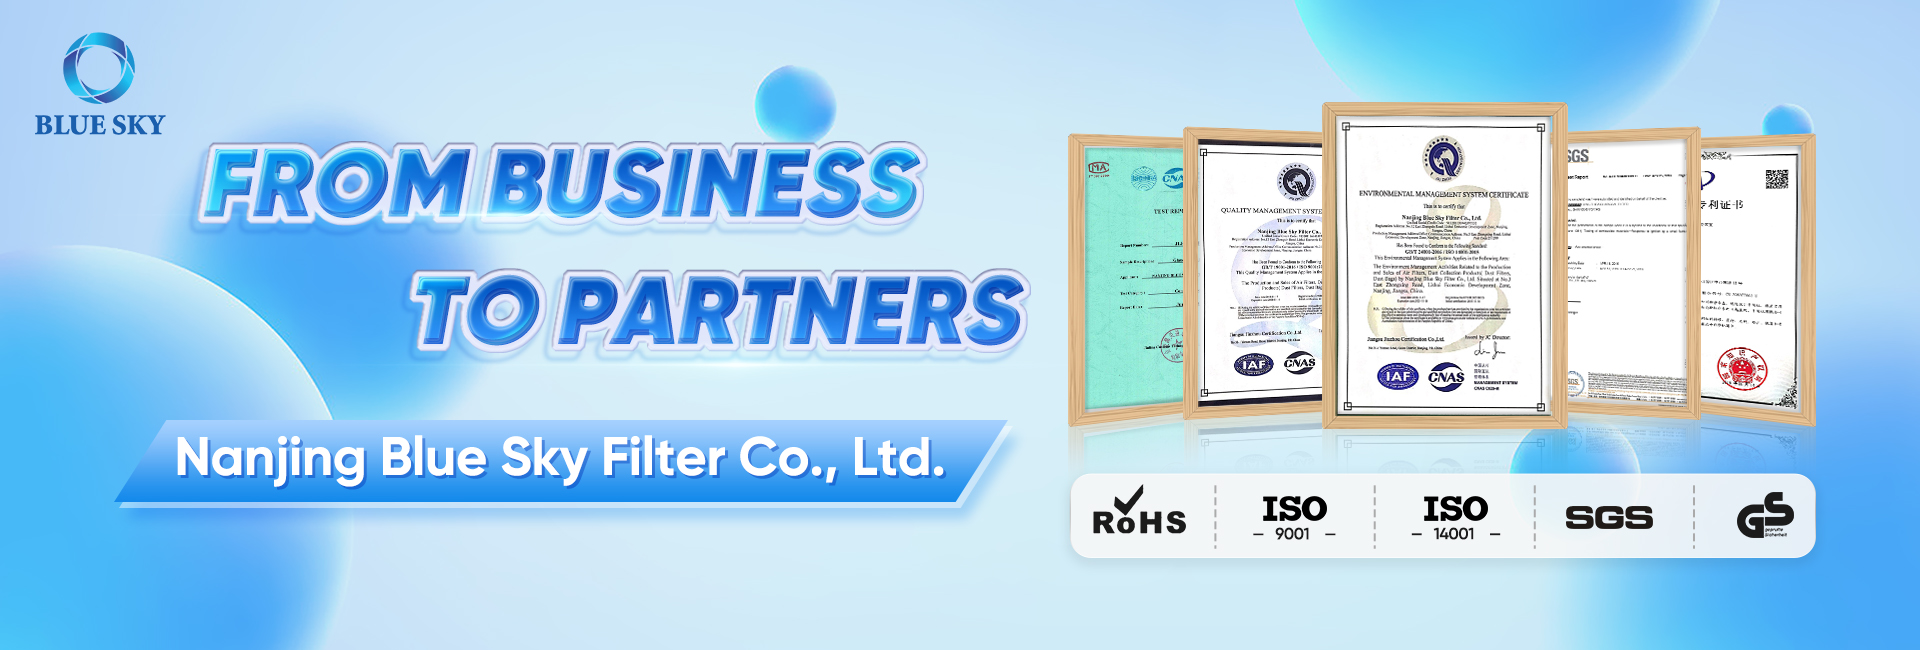 From Business to Partners